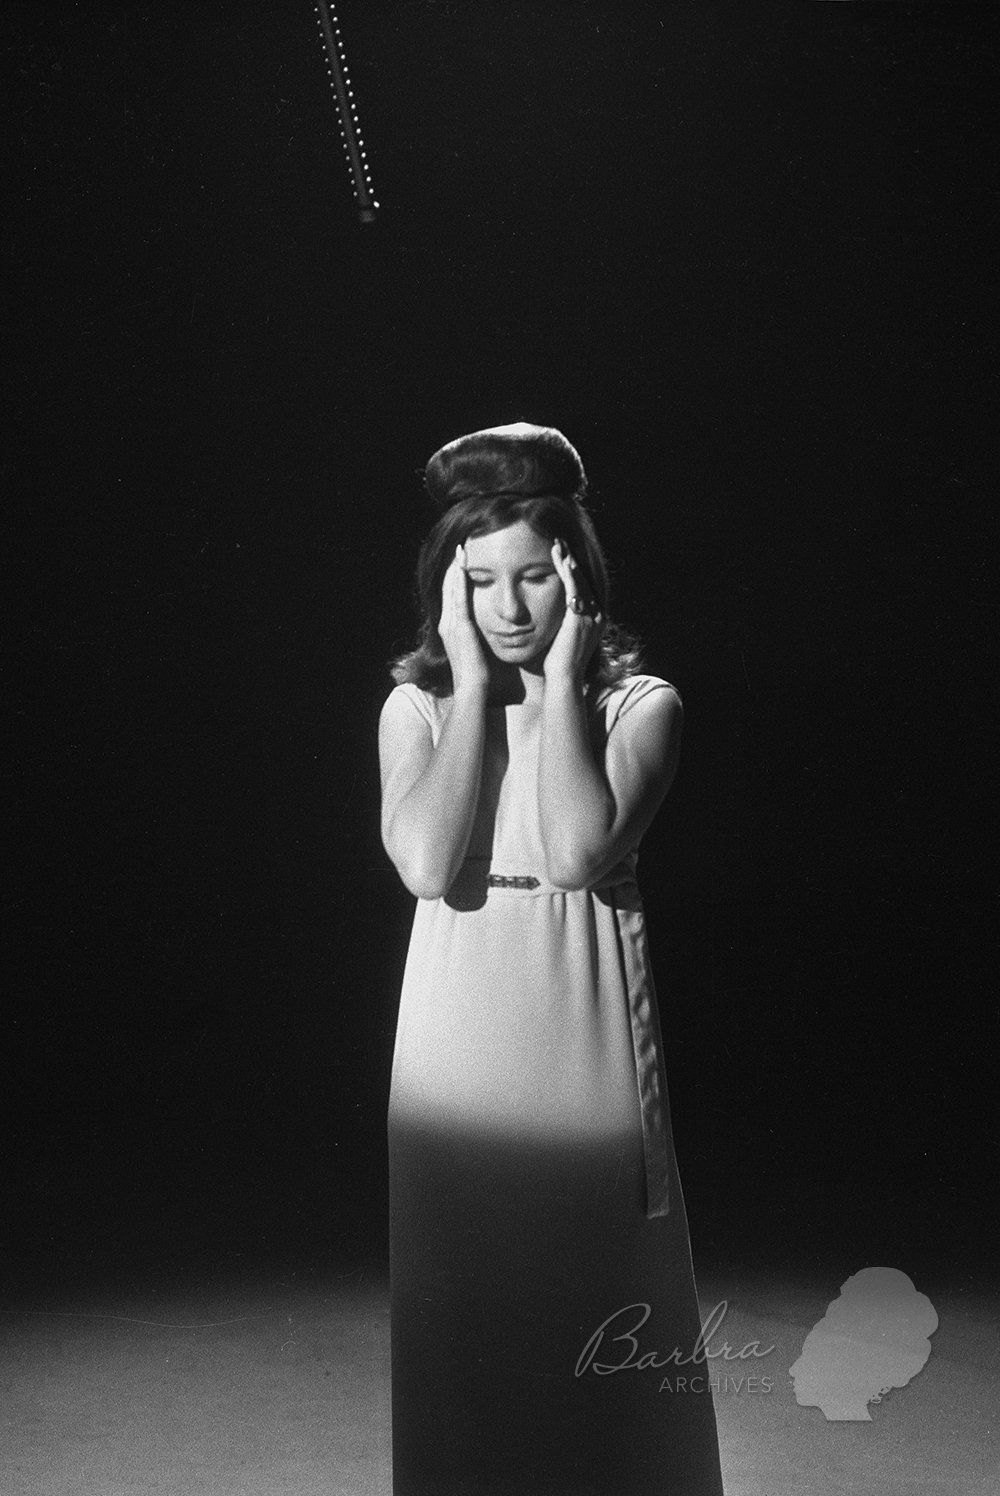 Barbra sings her first song on The Ed Sullivan Show.